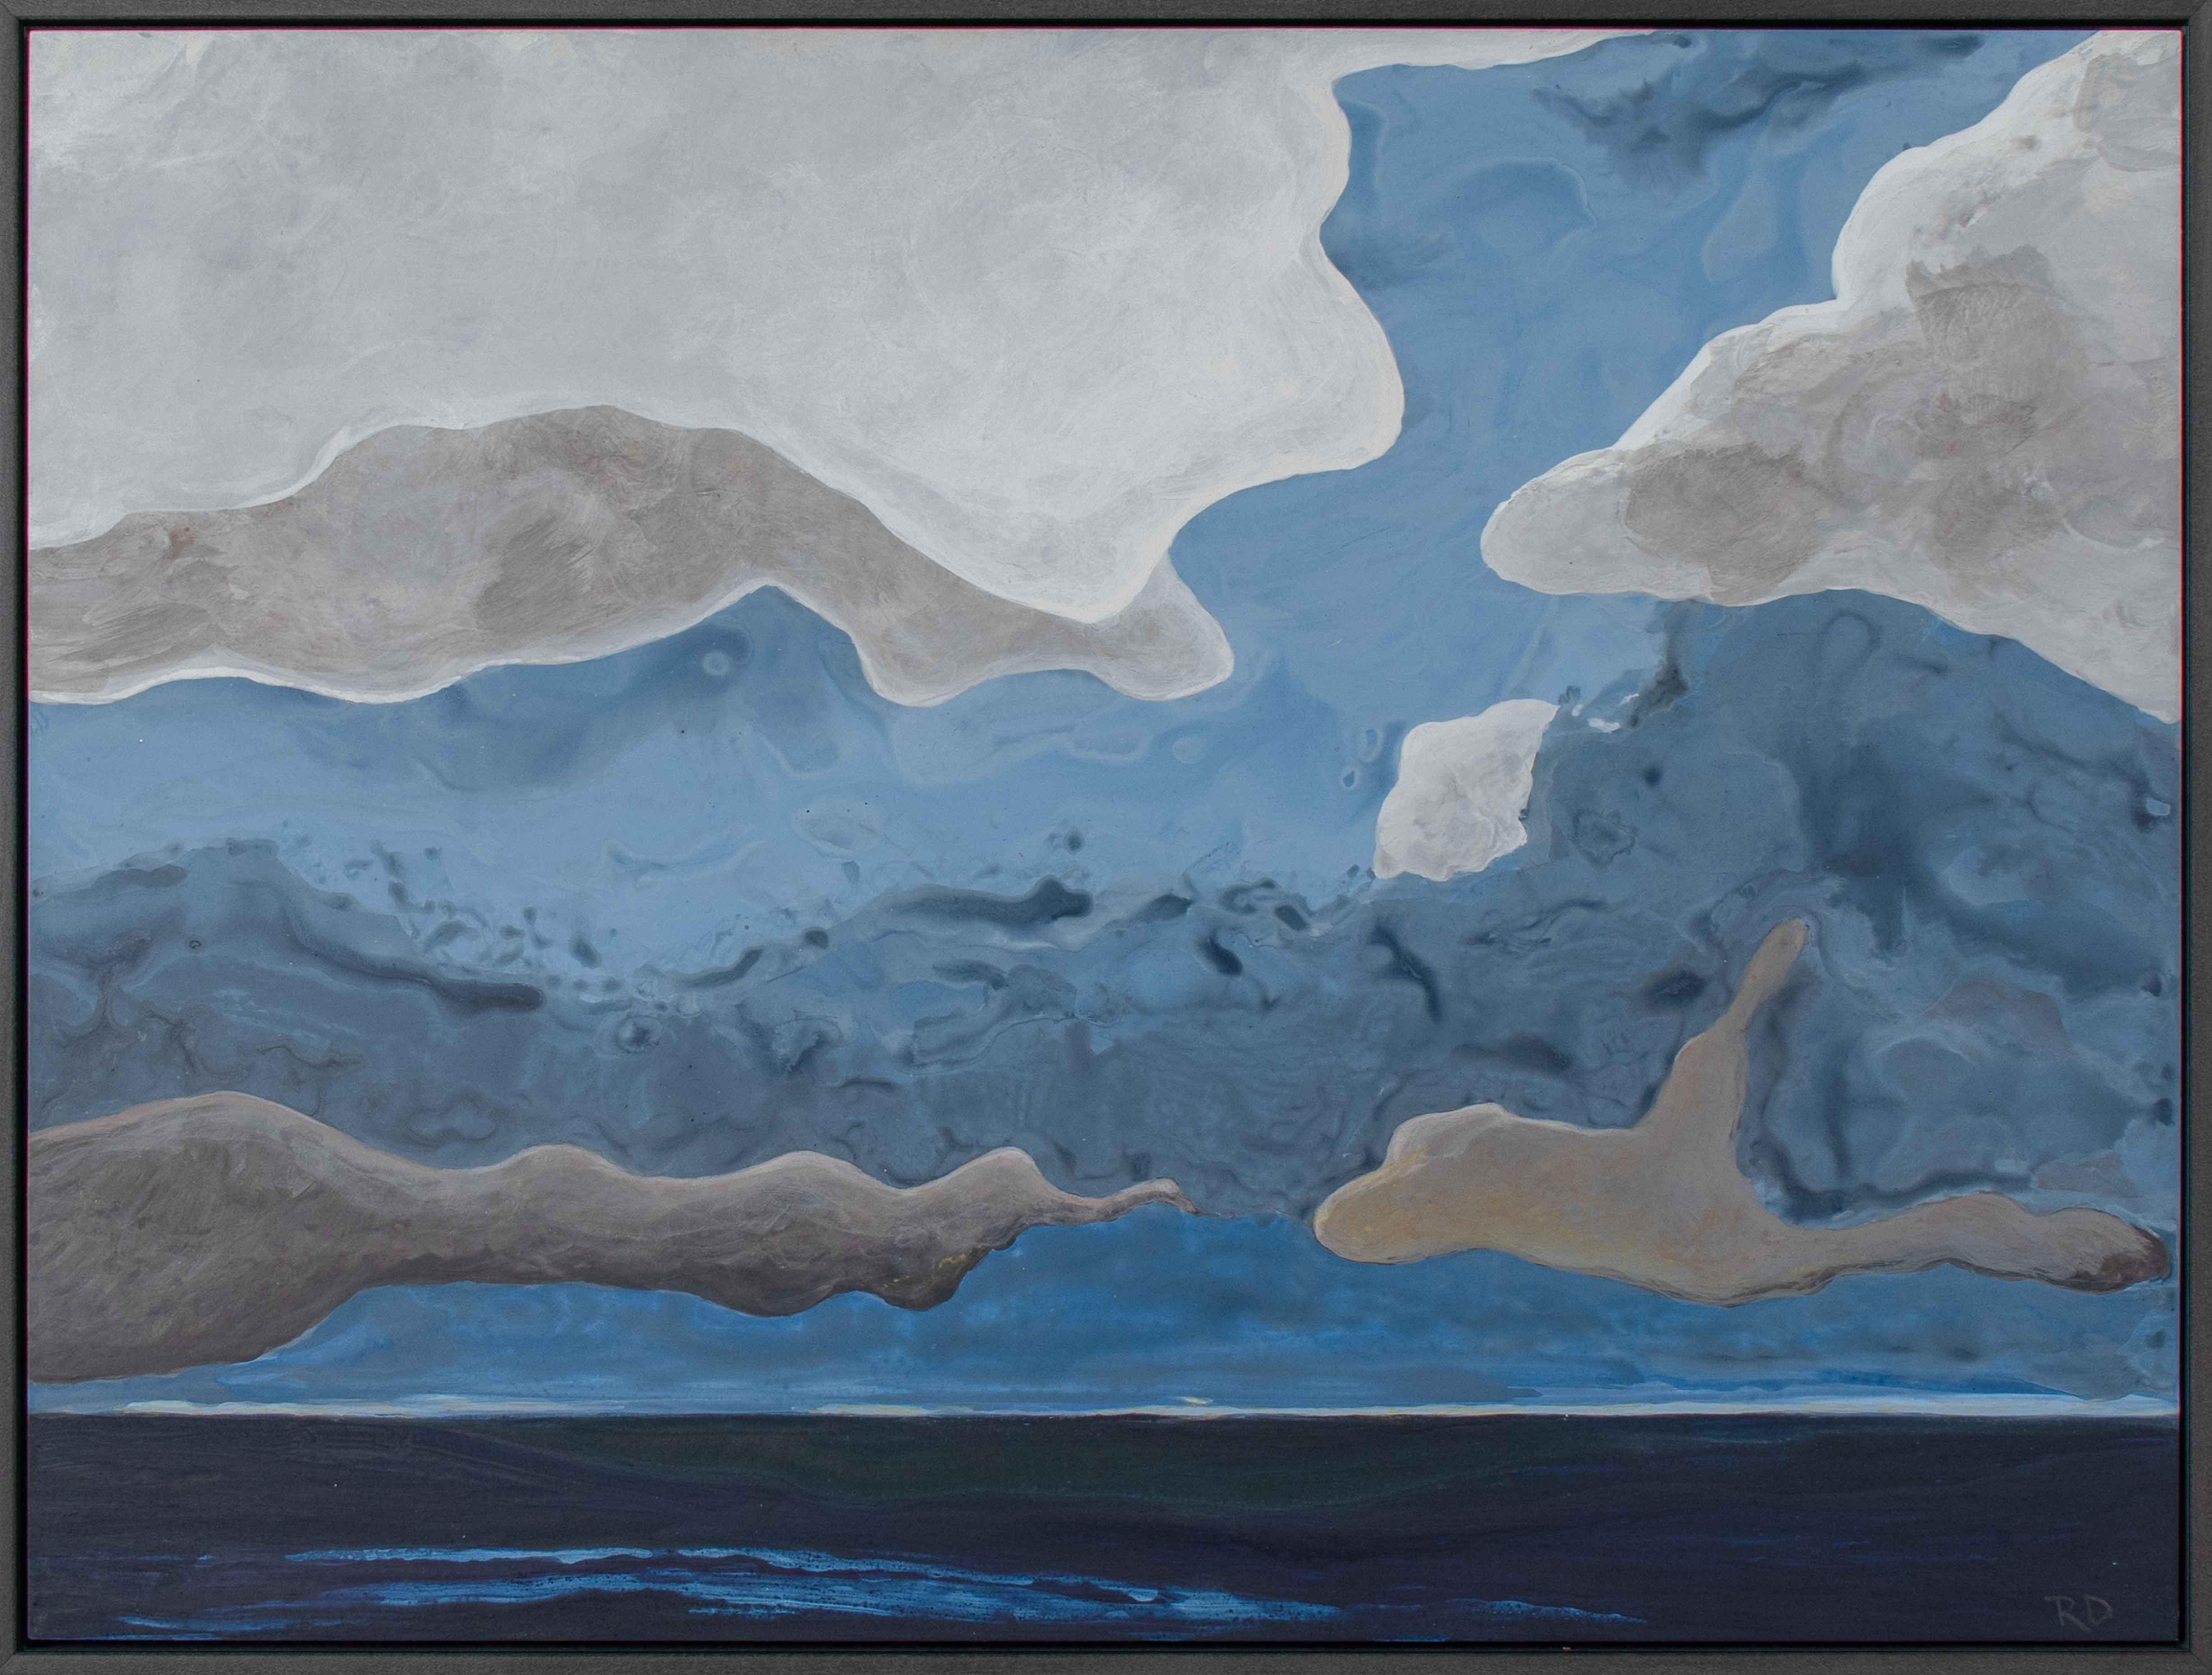 Rob Delamater Landscape Painting - The Storm Breaks 2022 Hand-mixed Pigments